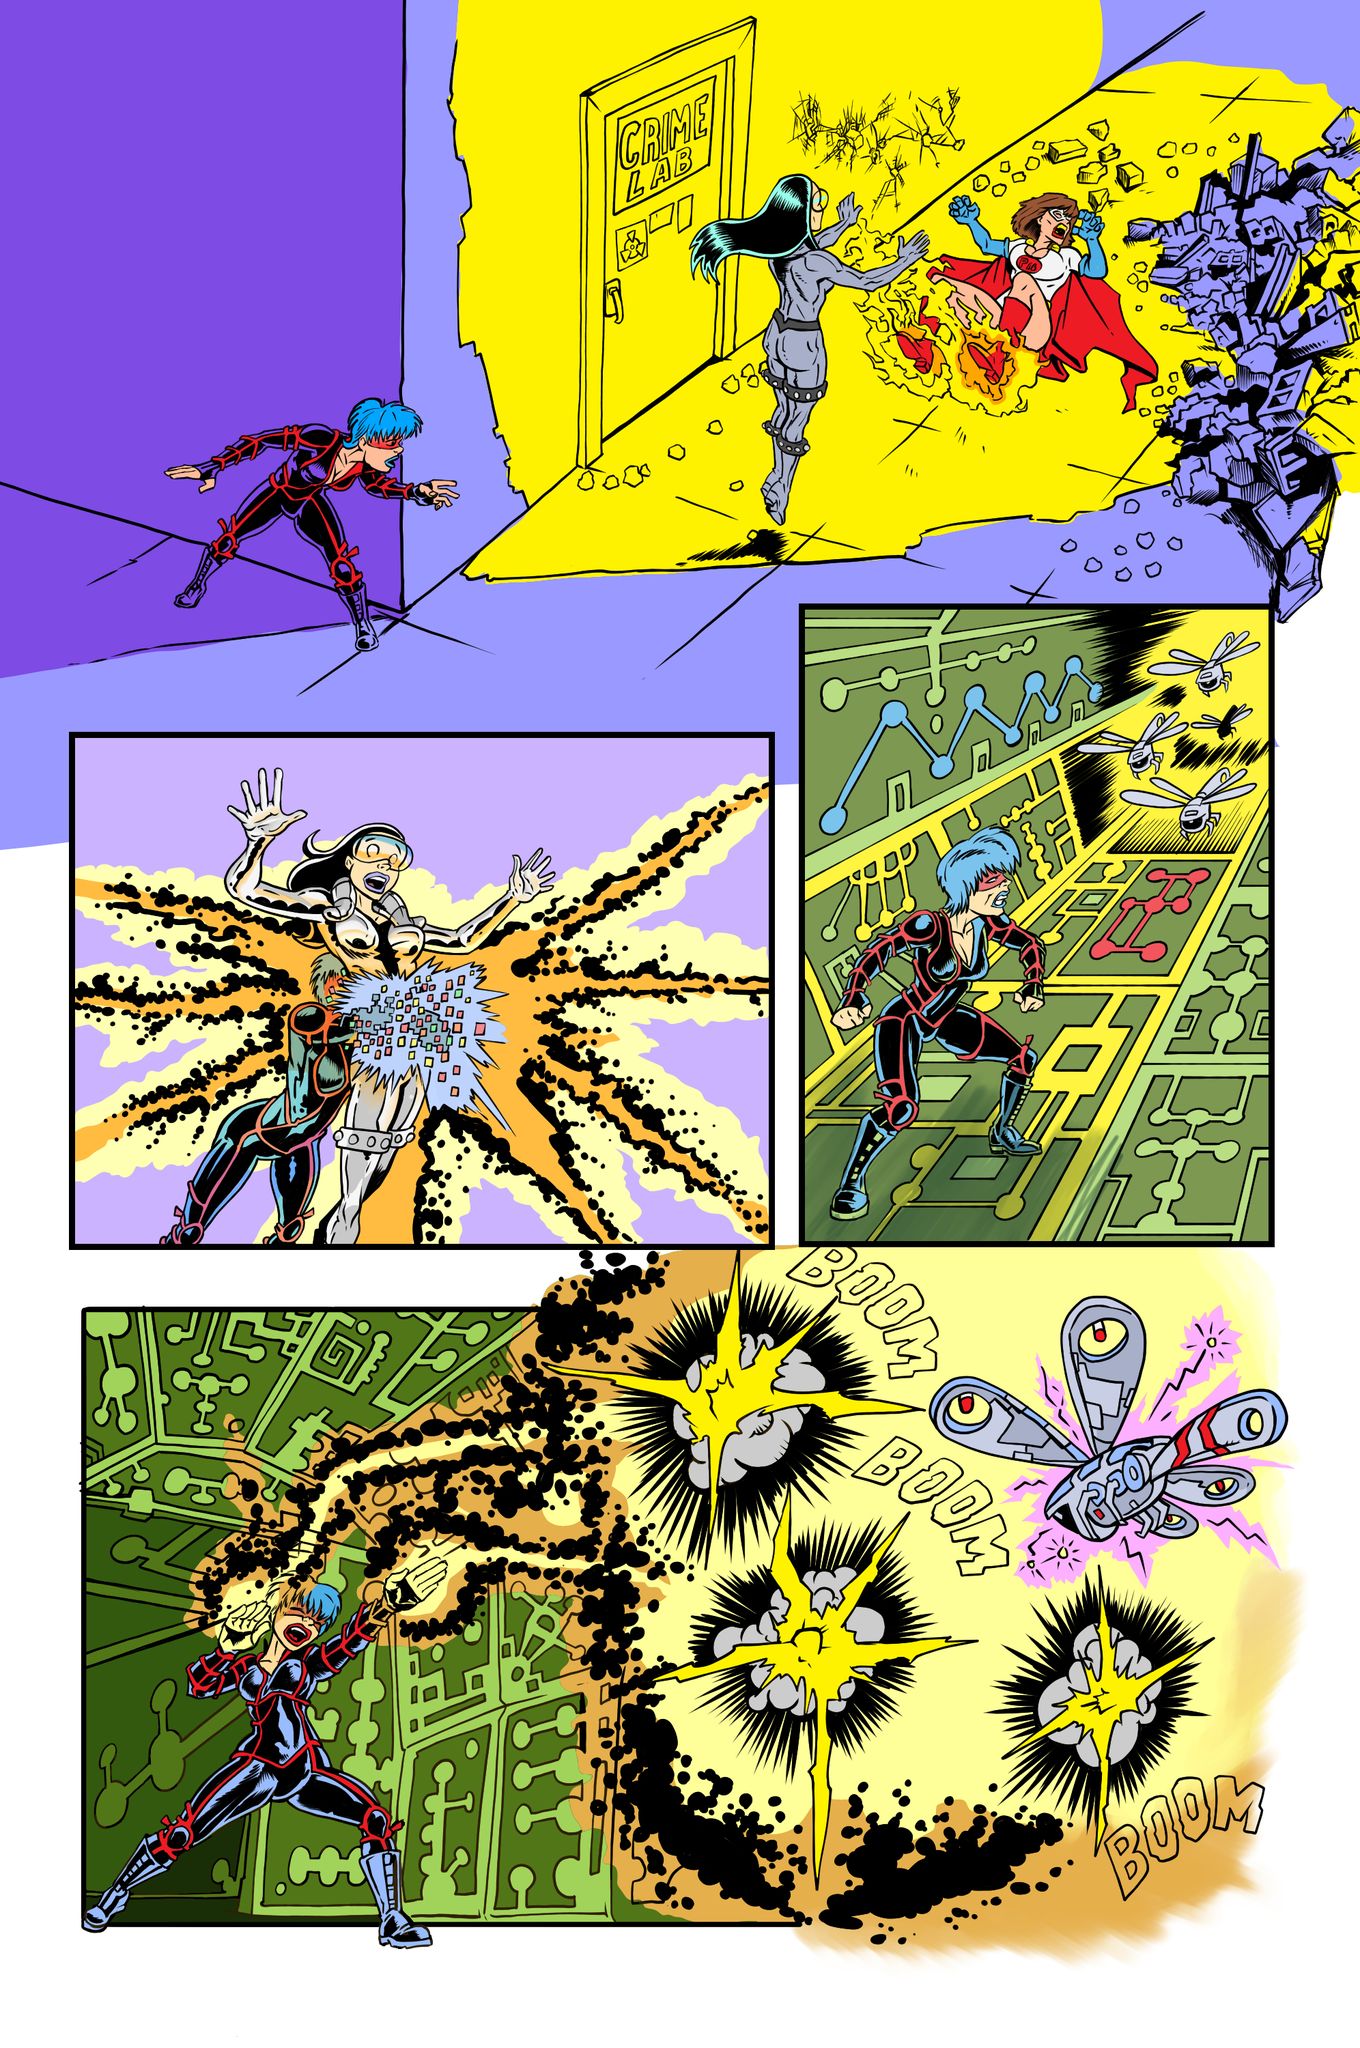 Issue 4 Wayne page 13 art almost done.jpg